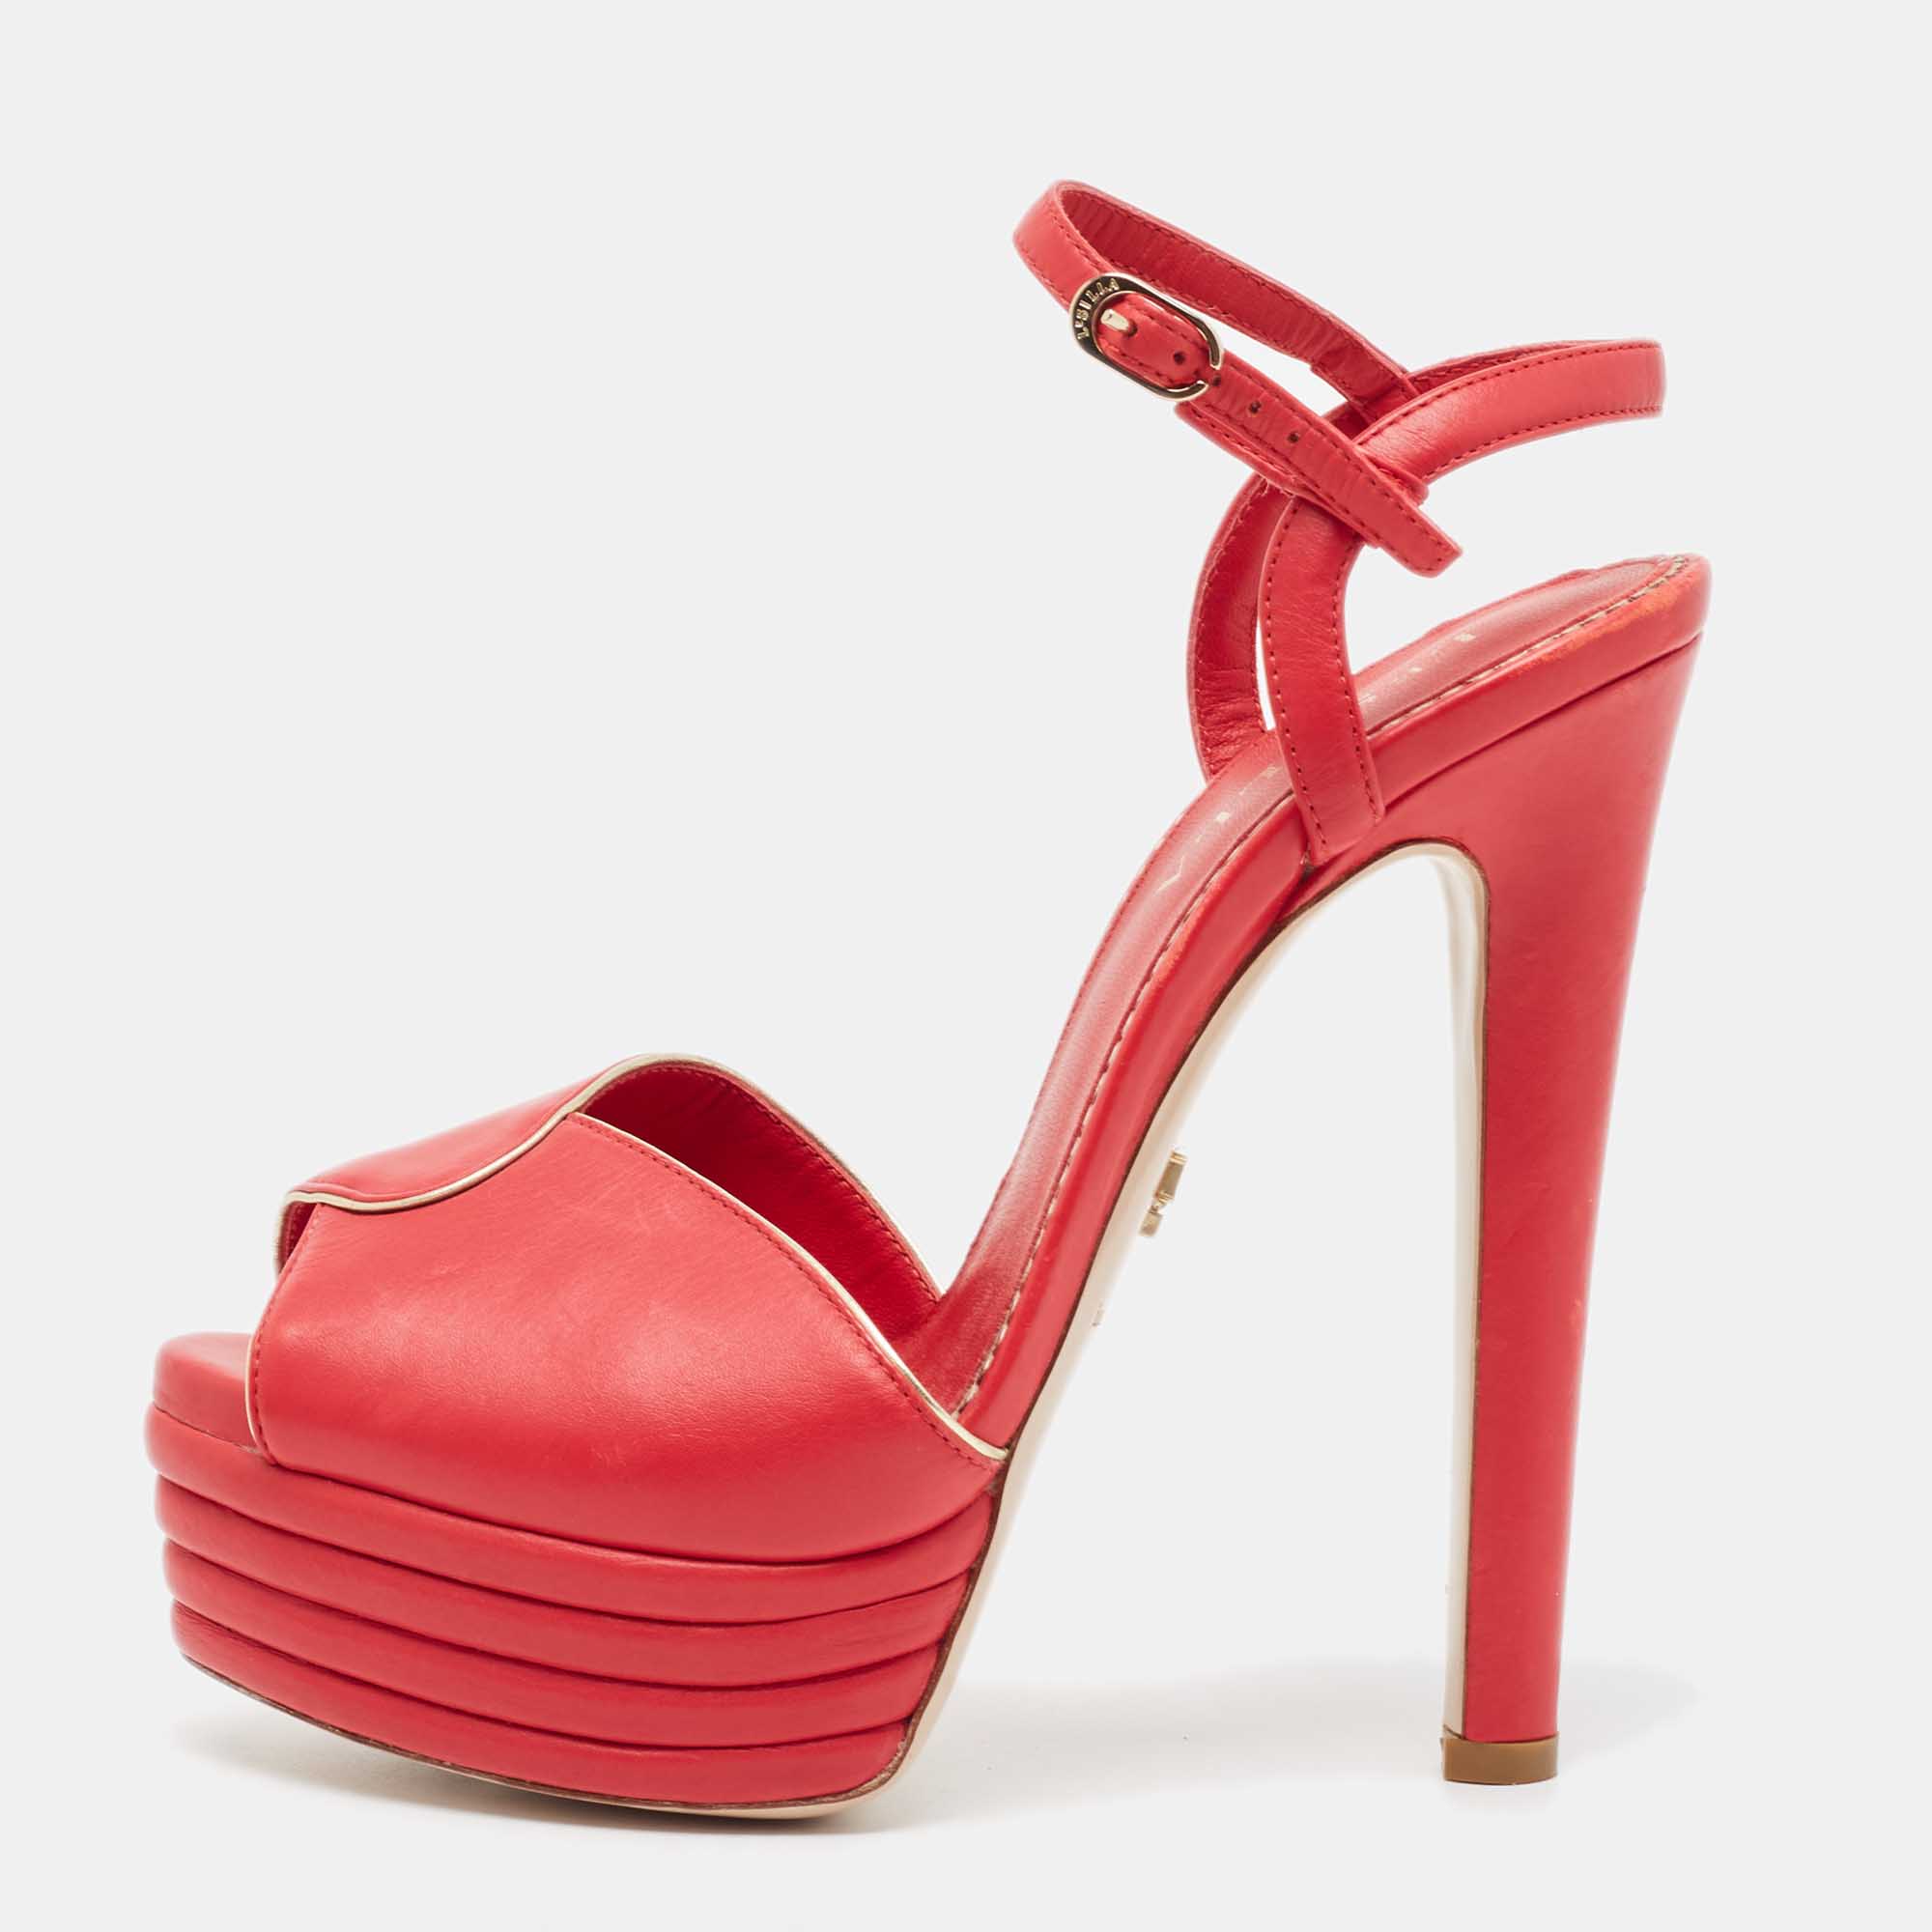 

Le Silla Red Leather Peep Toe Platform Ankle Strap Sandals Size